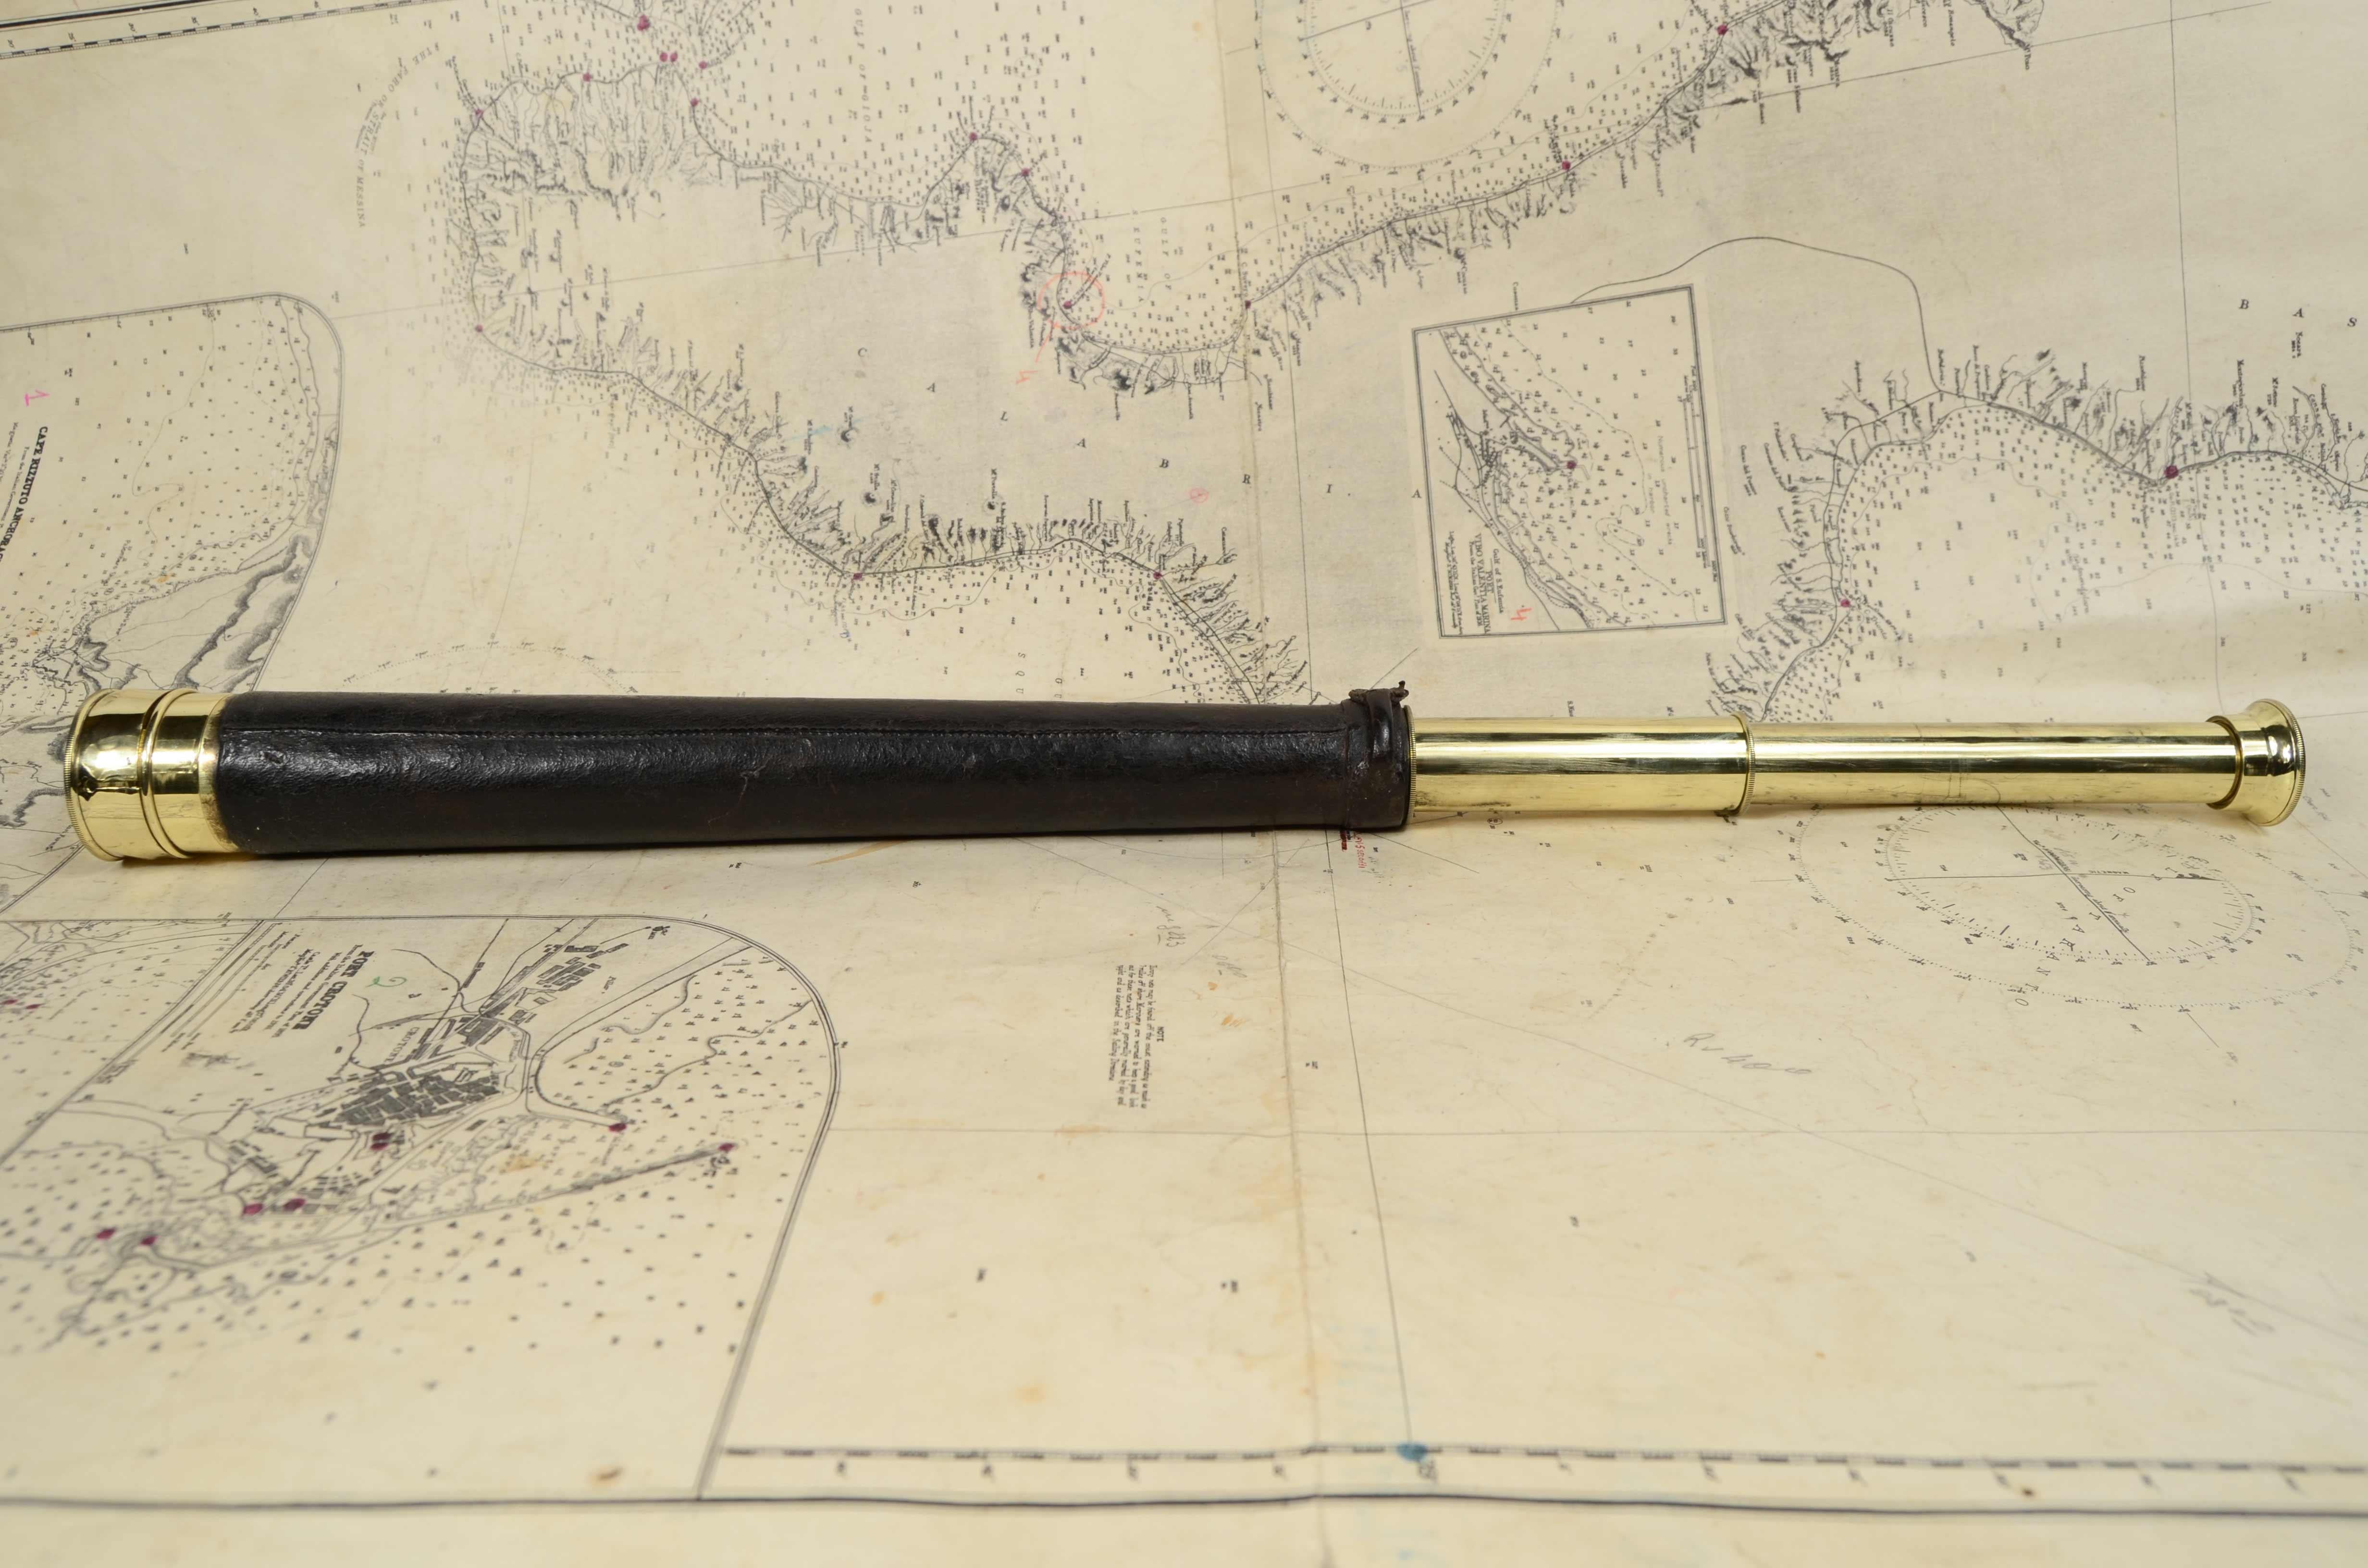 Round-section brass telescope with a slightly splayed shape and leather-covered handle, English manufacture in the second half of the 19th century Mass fire with two extensions. Maximum length 60 cm, inches 23.6,  minimum cm 34.,7,- inches 13.6,